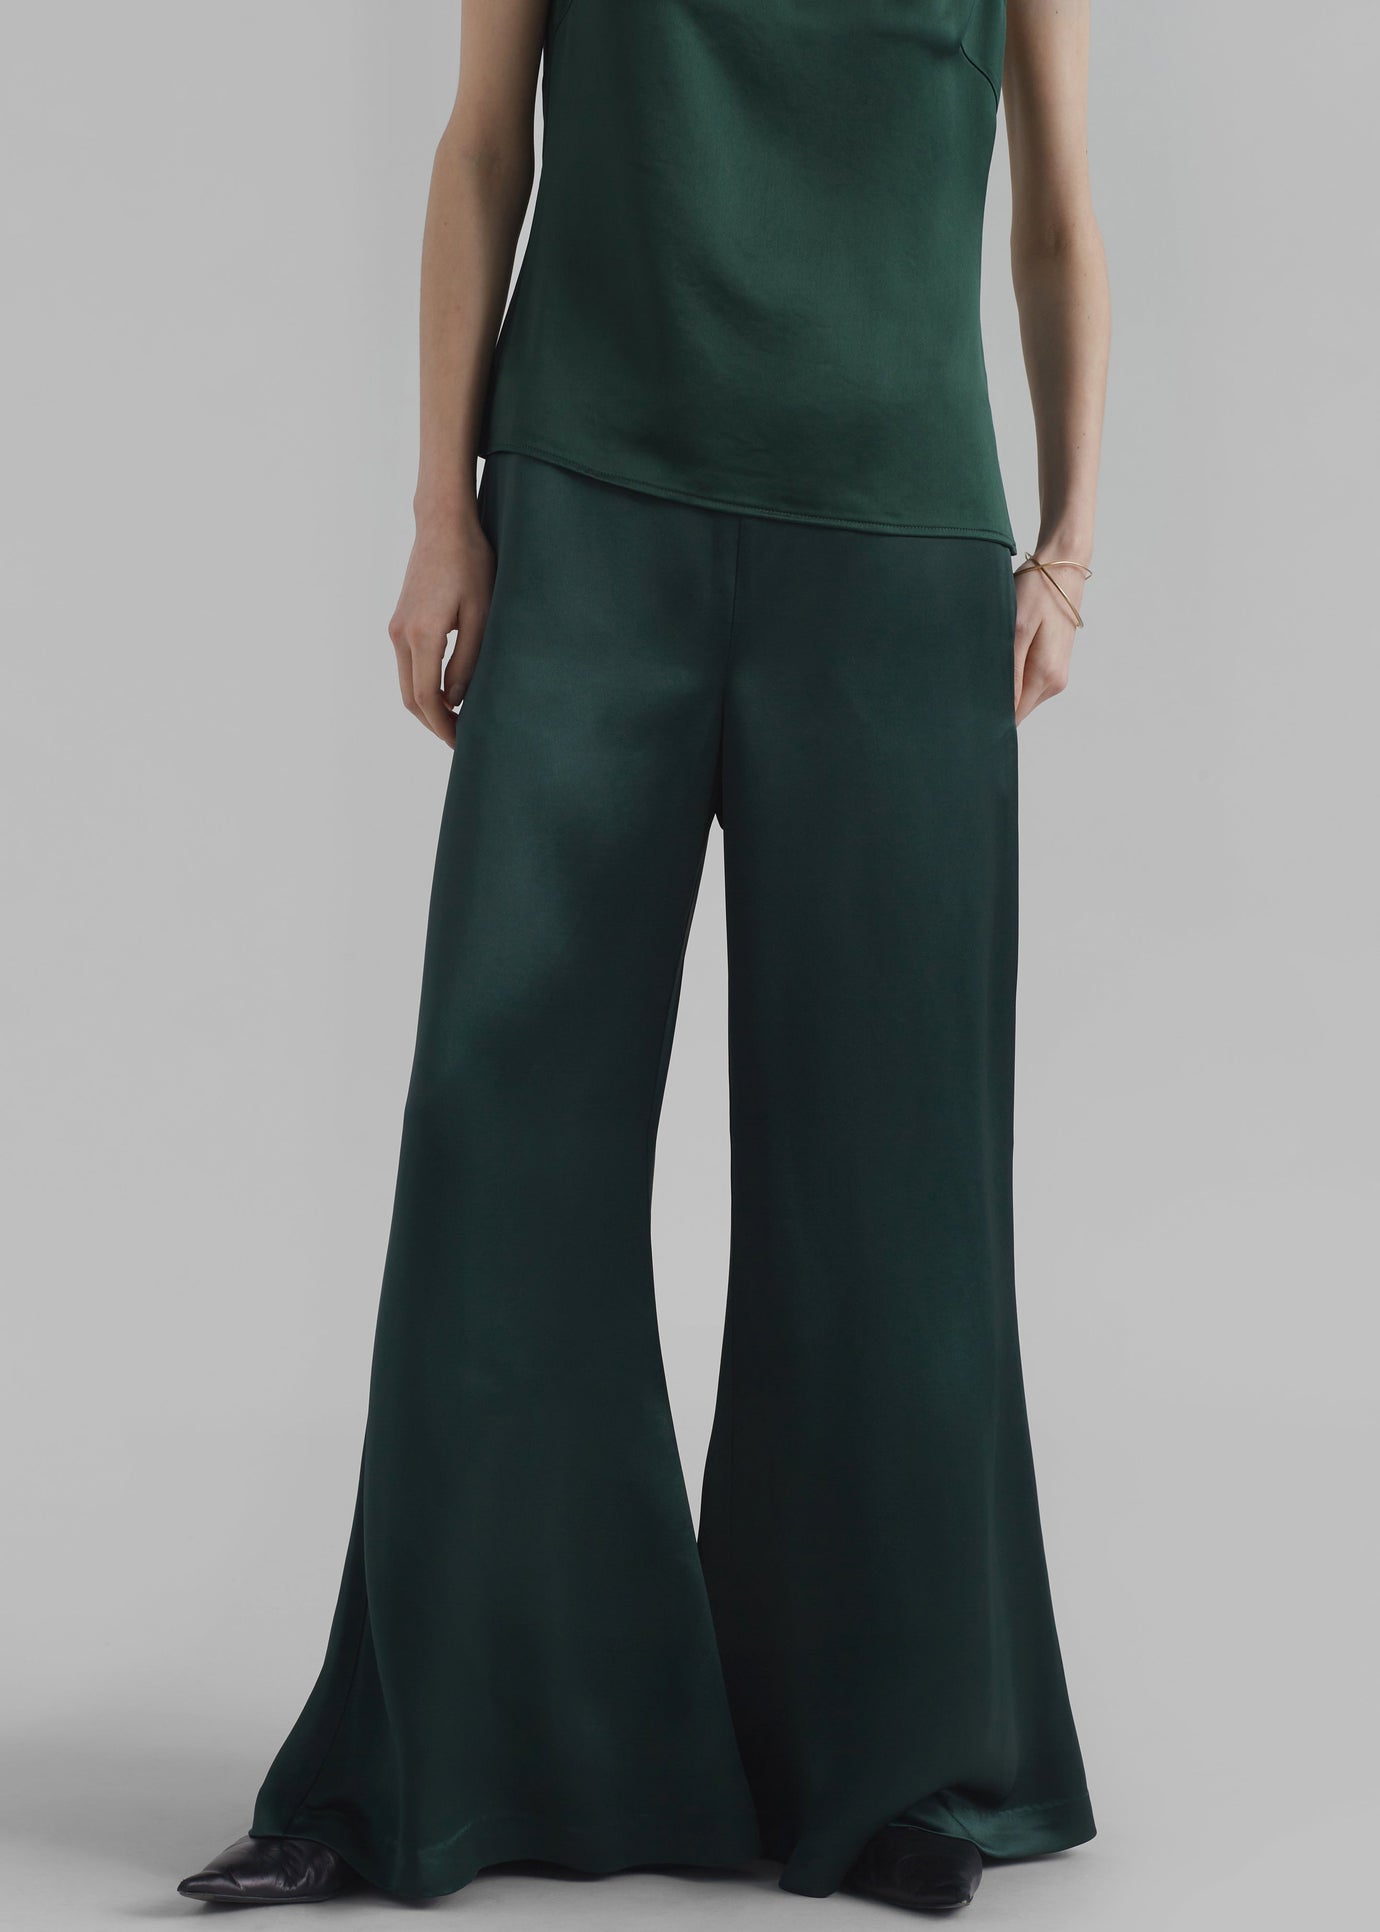 By Malene Birger Lucee Flared Trousers - Sycamore - 1